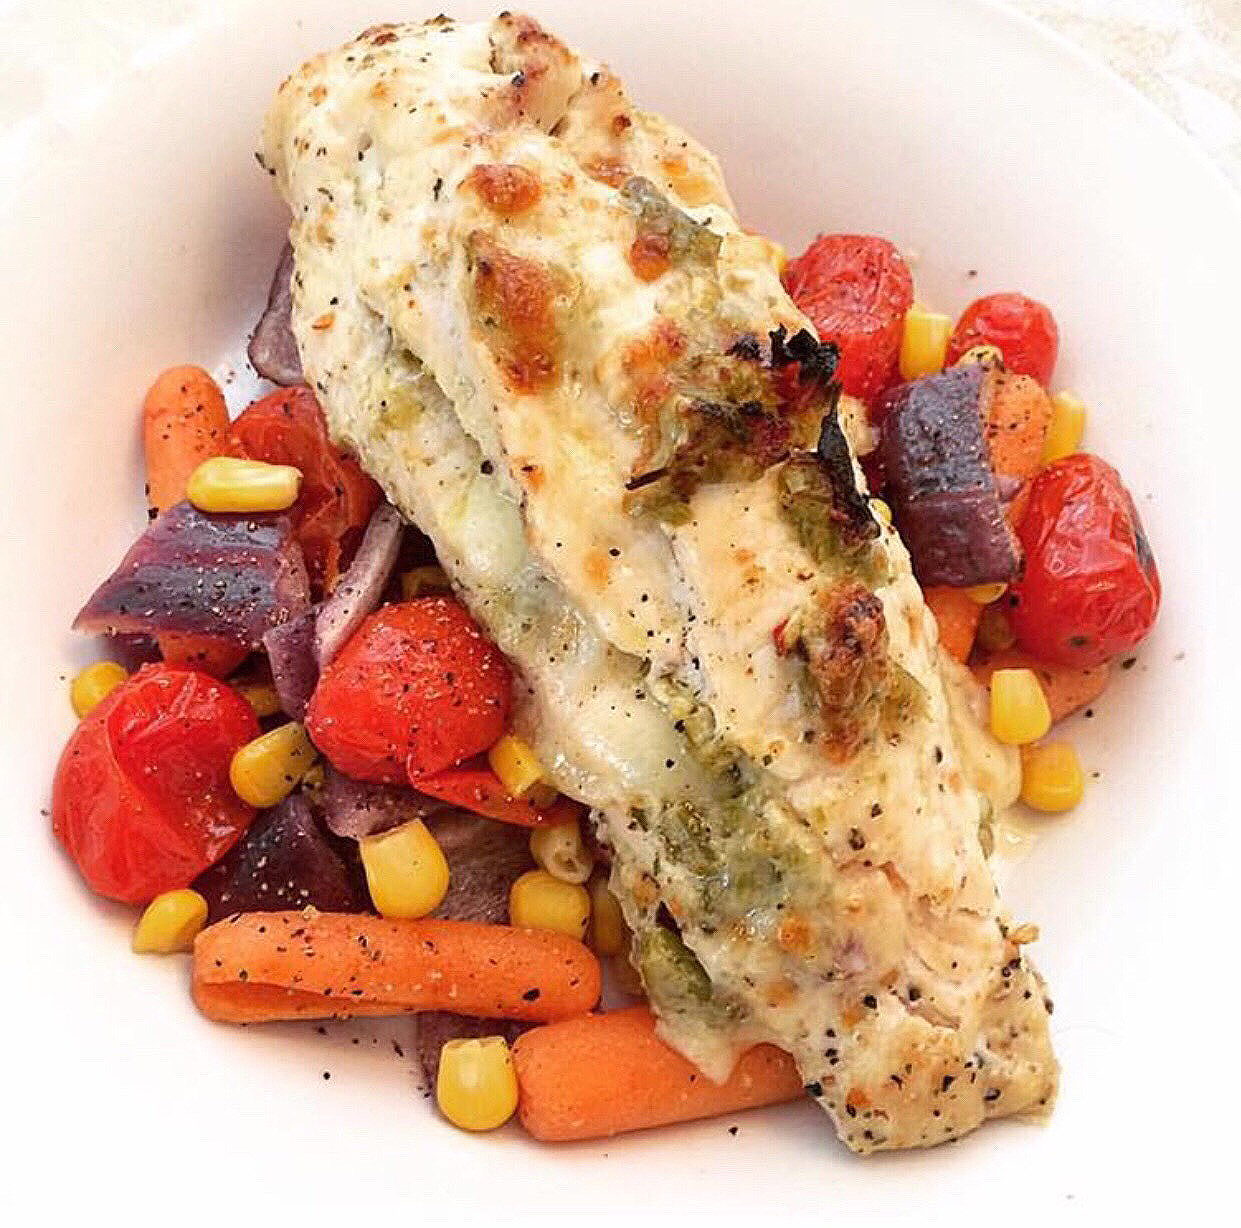 corn_meat_tomato_garnishes_carrots_chicken_salad_plate